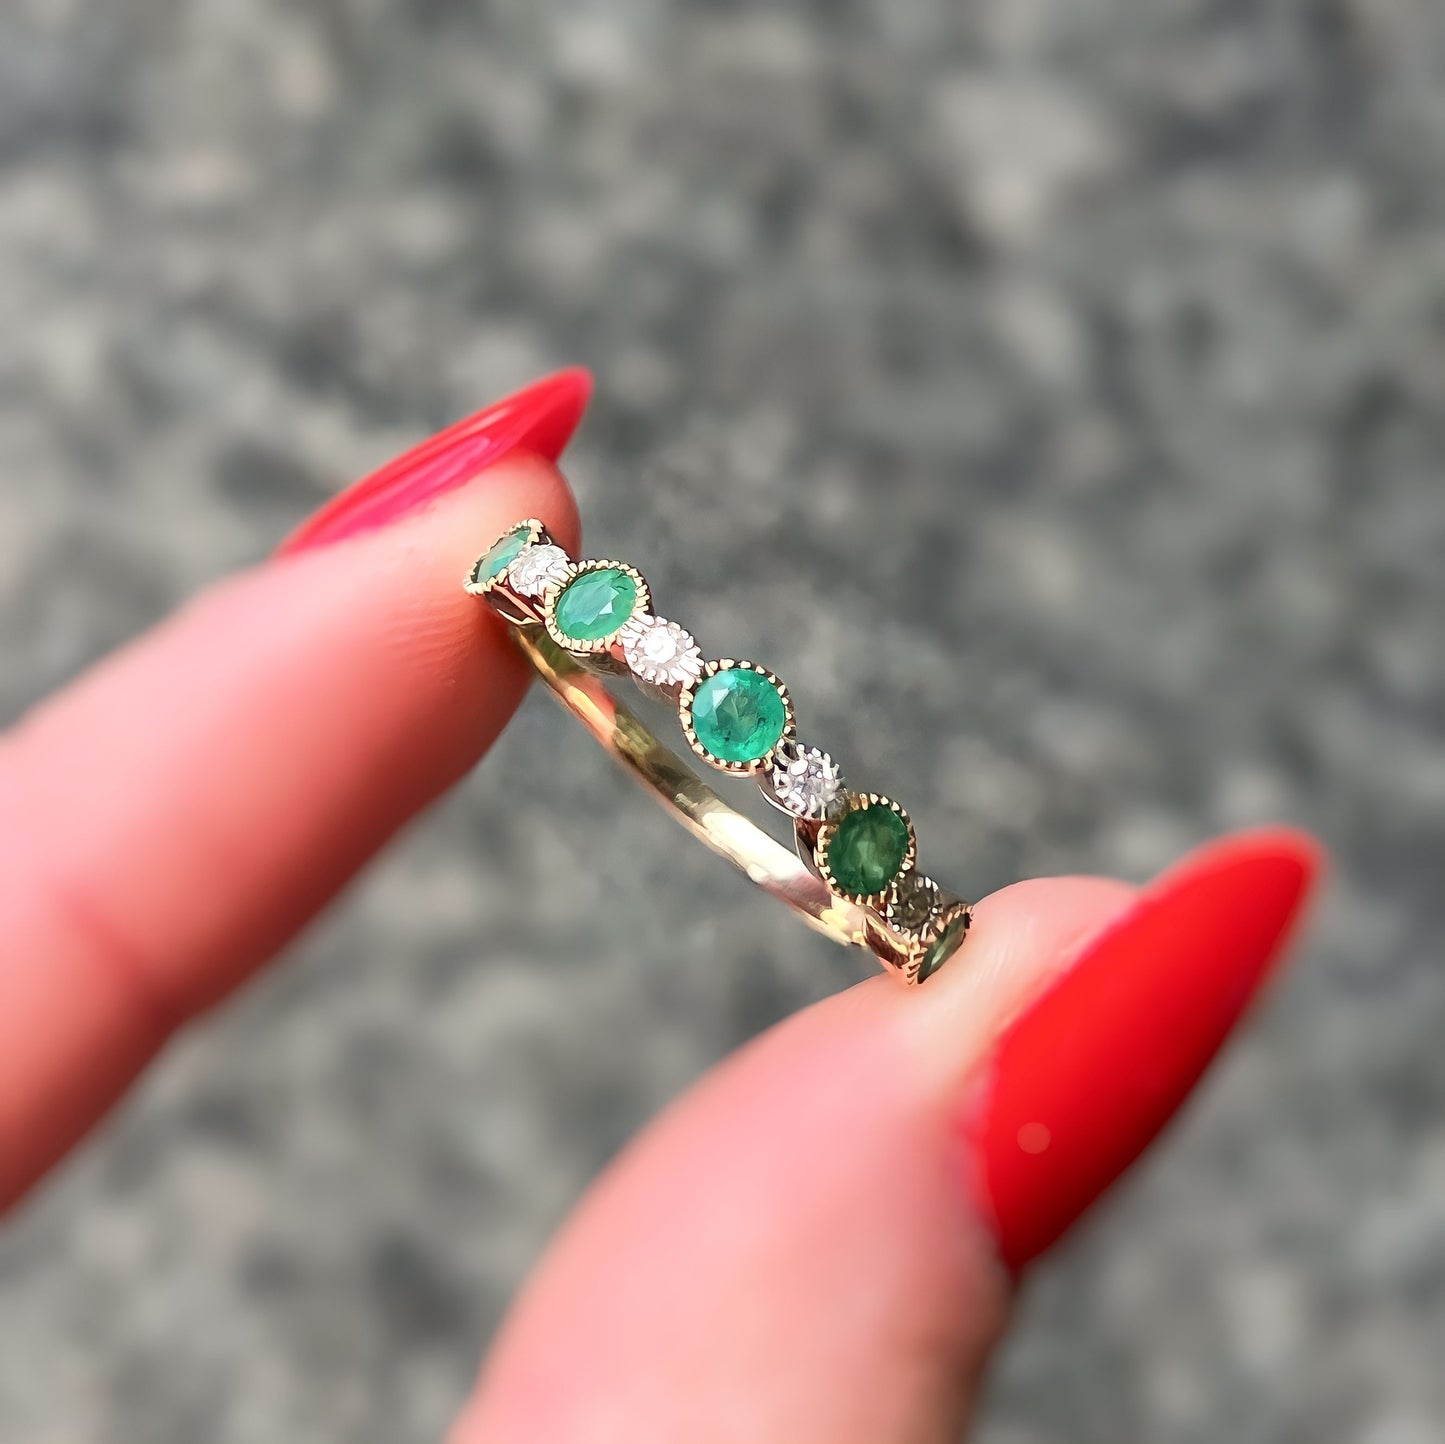 9ct Yellow Gold Emerald and Diamond Half Eternity Ring - Size O